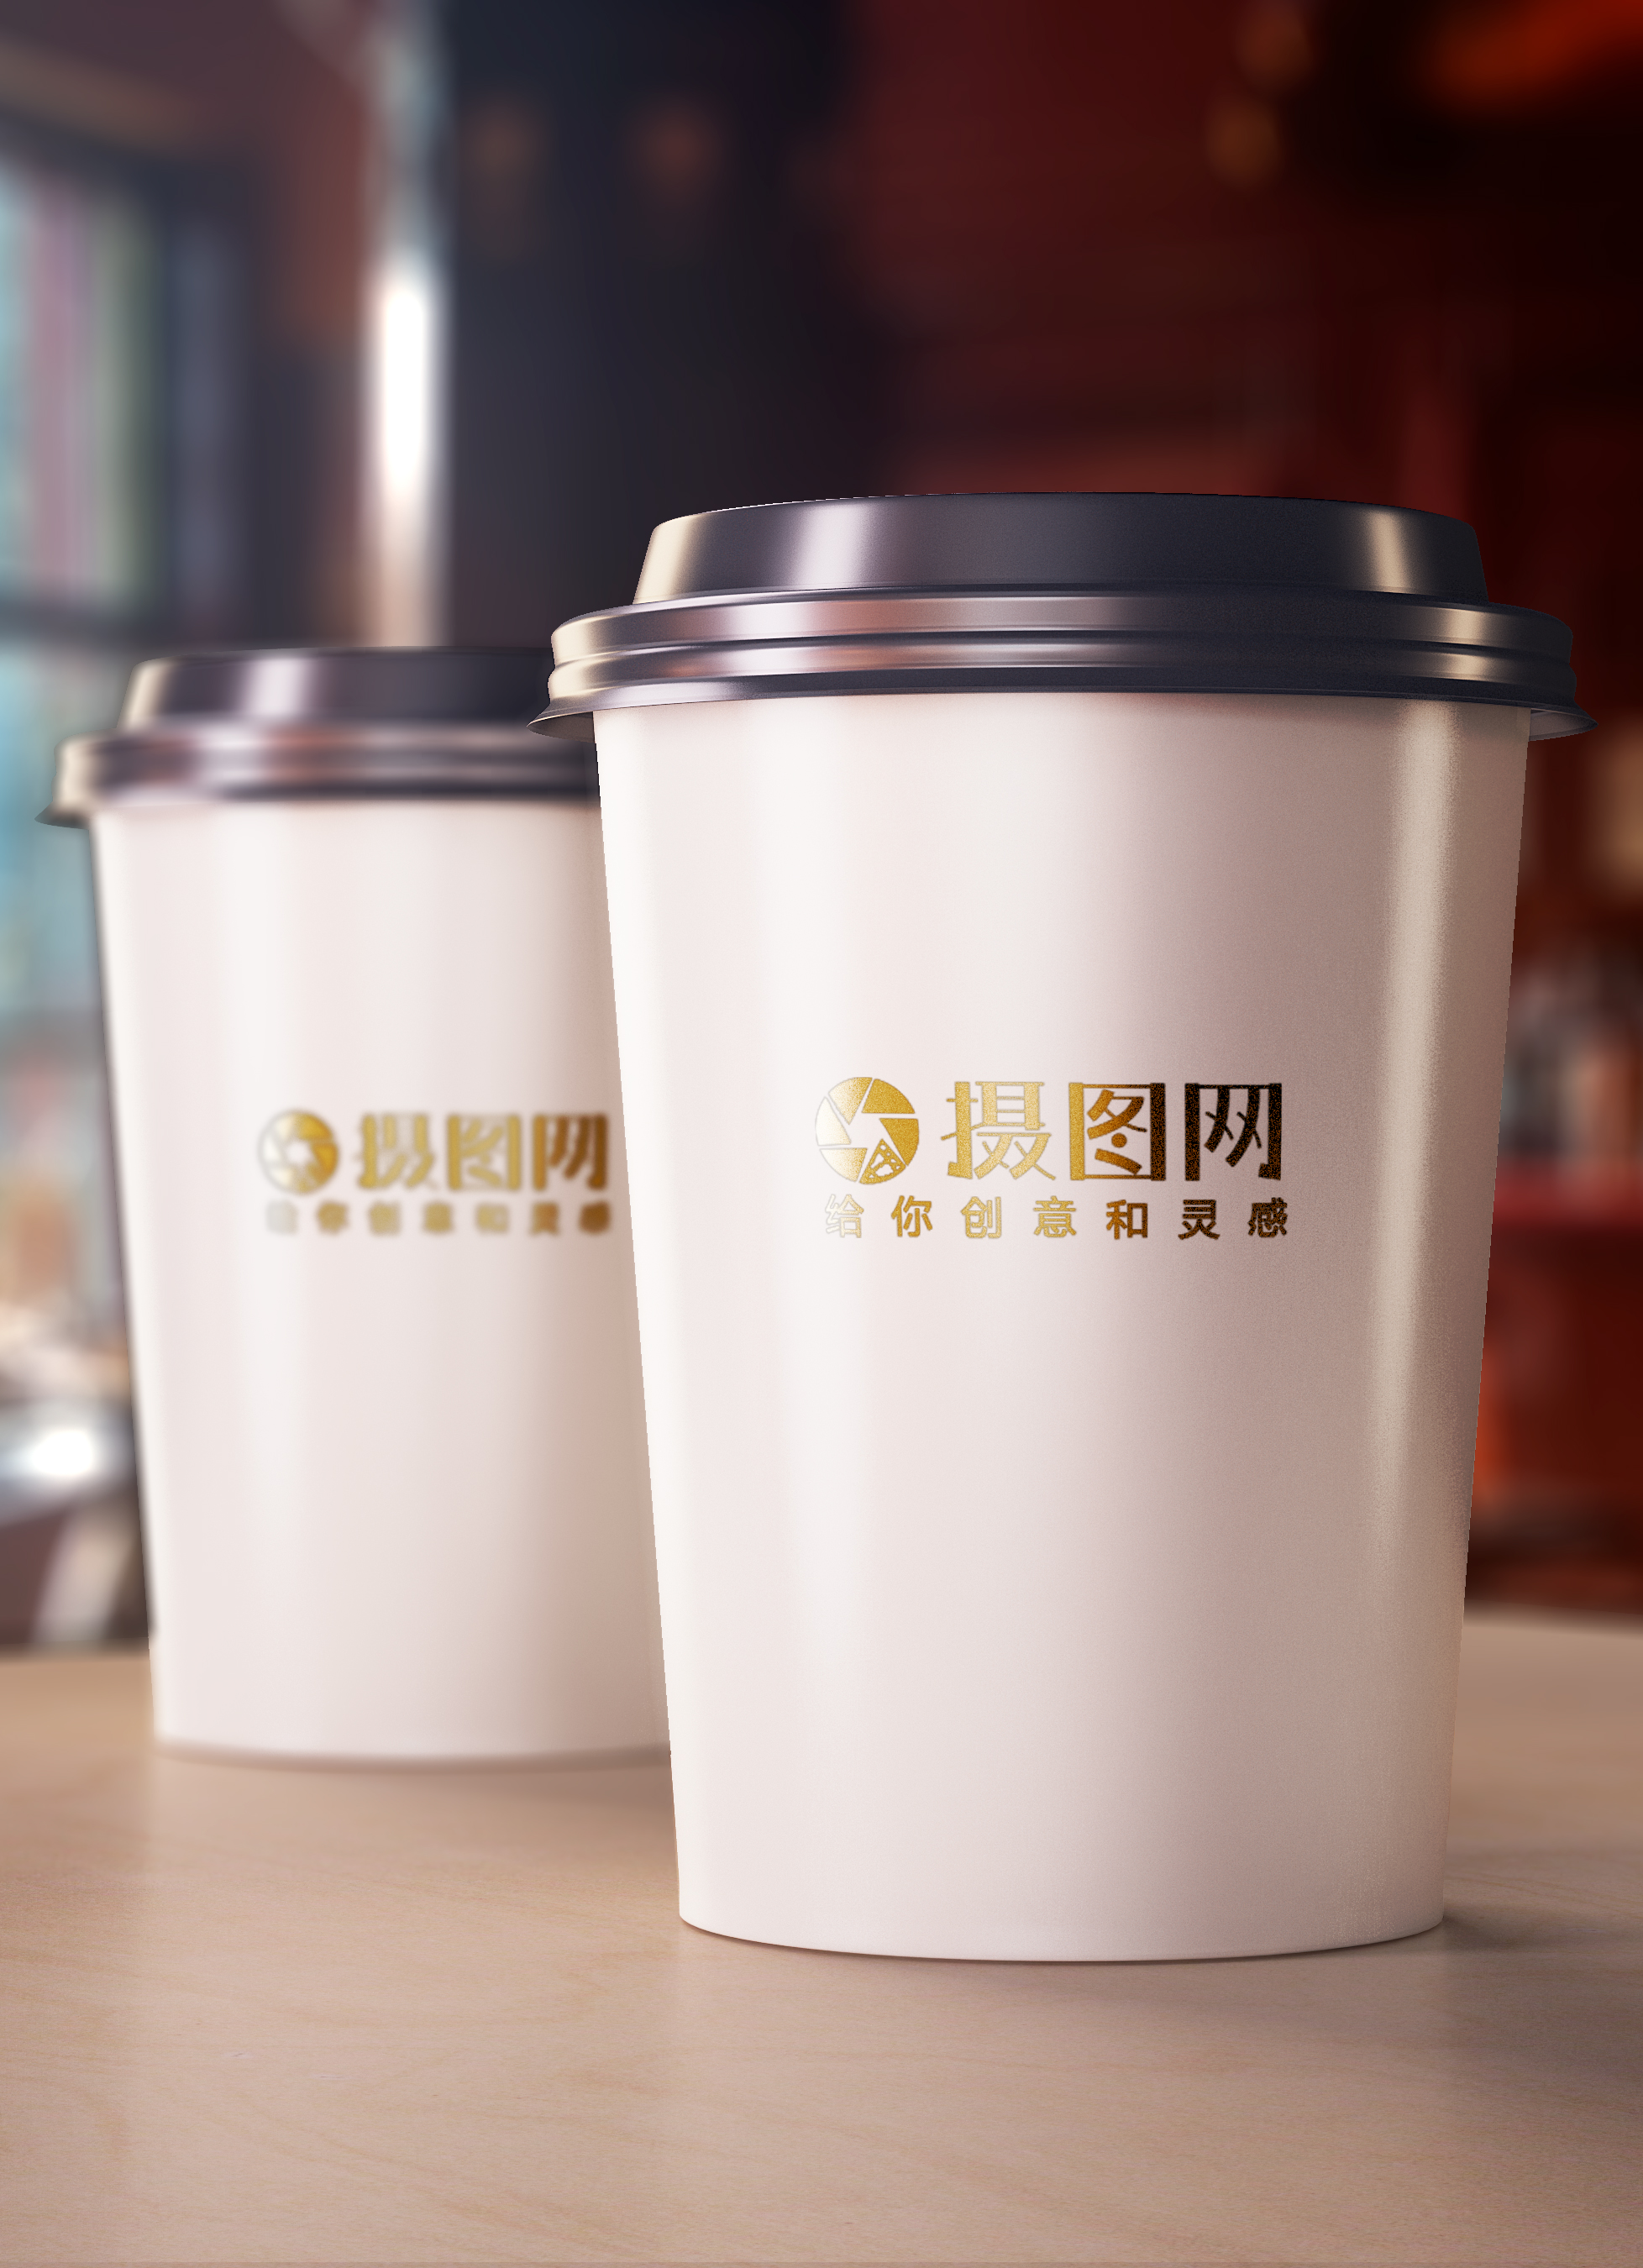 Download Coffee Cup Mockup Template Image Picture Free Download 400783852 Lovepik Com PSD Mockup Templates